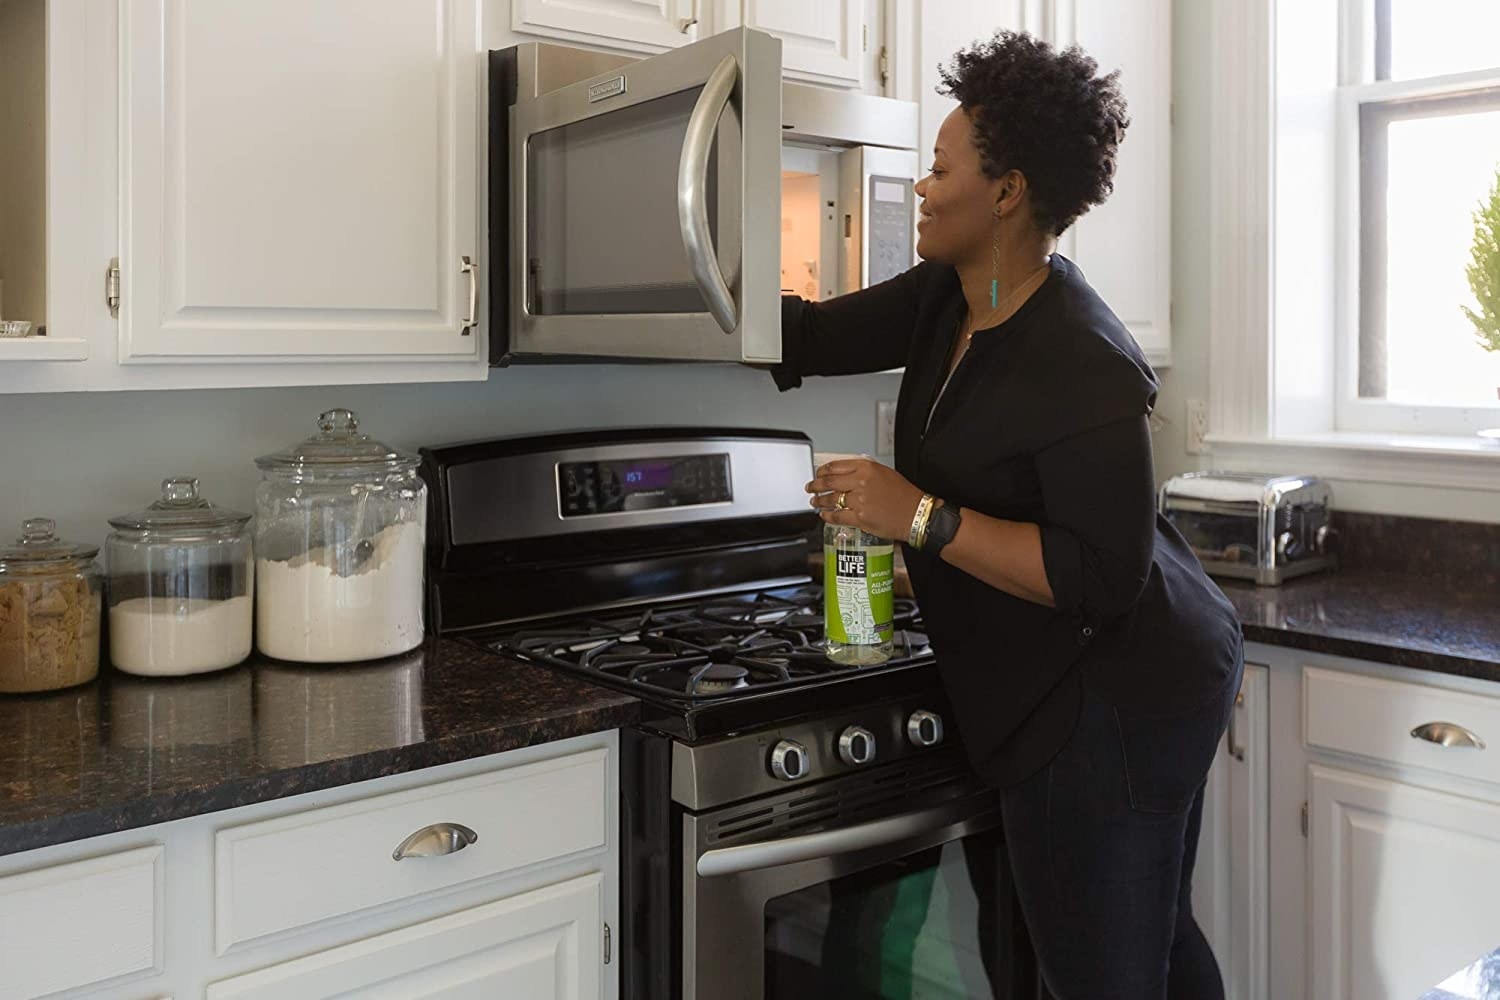 Model uses Better Life Natural All-Purpose Cleaner to clean inside of microwave